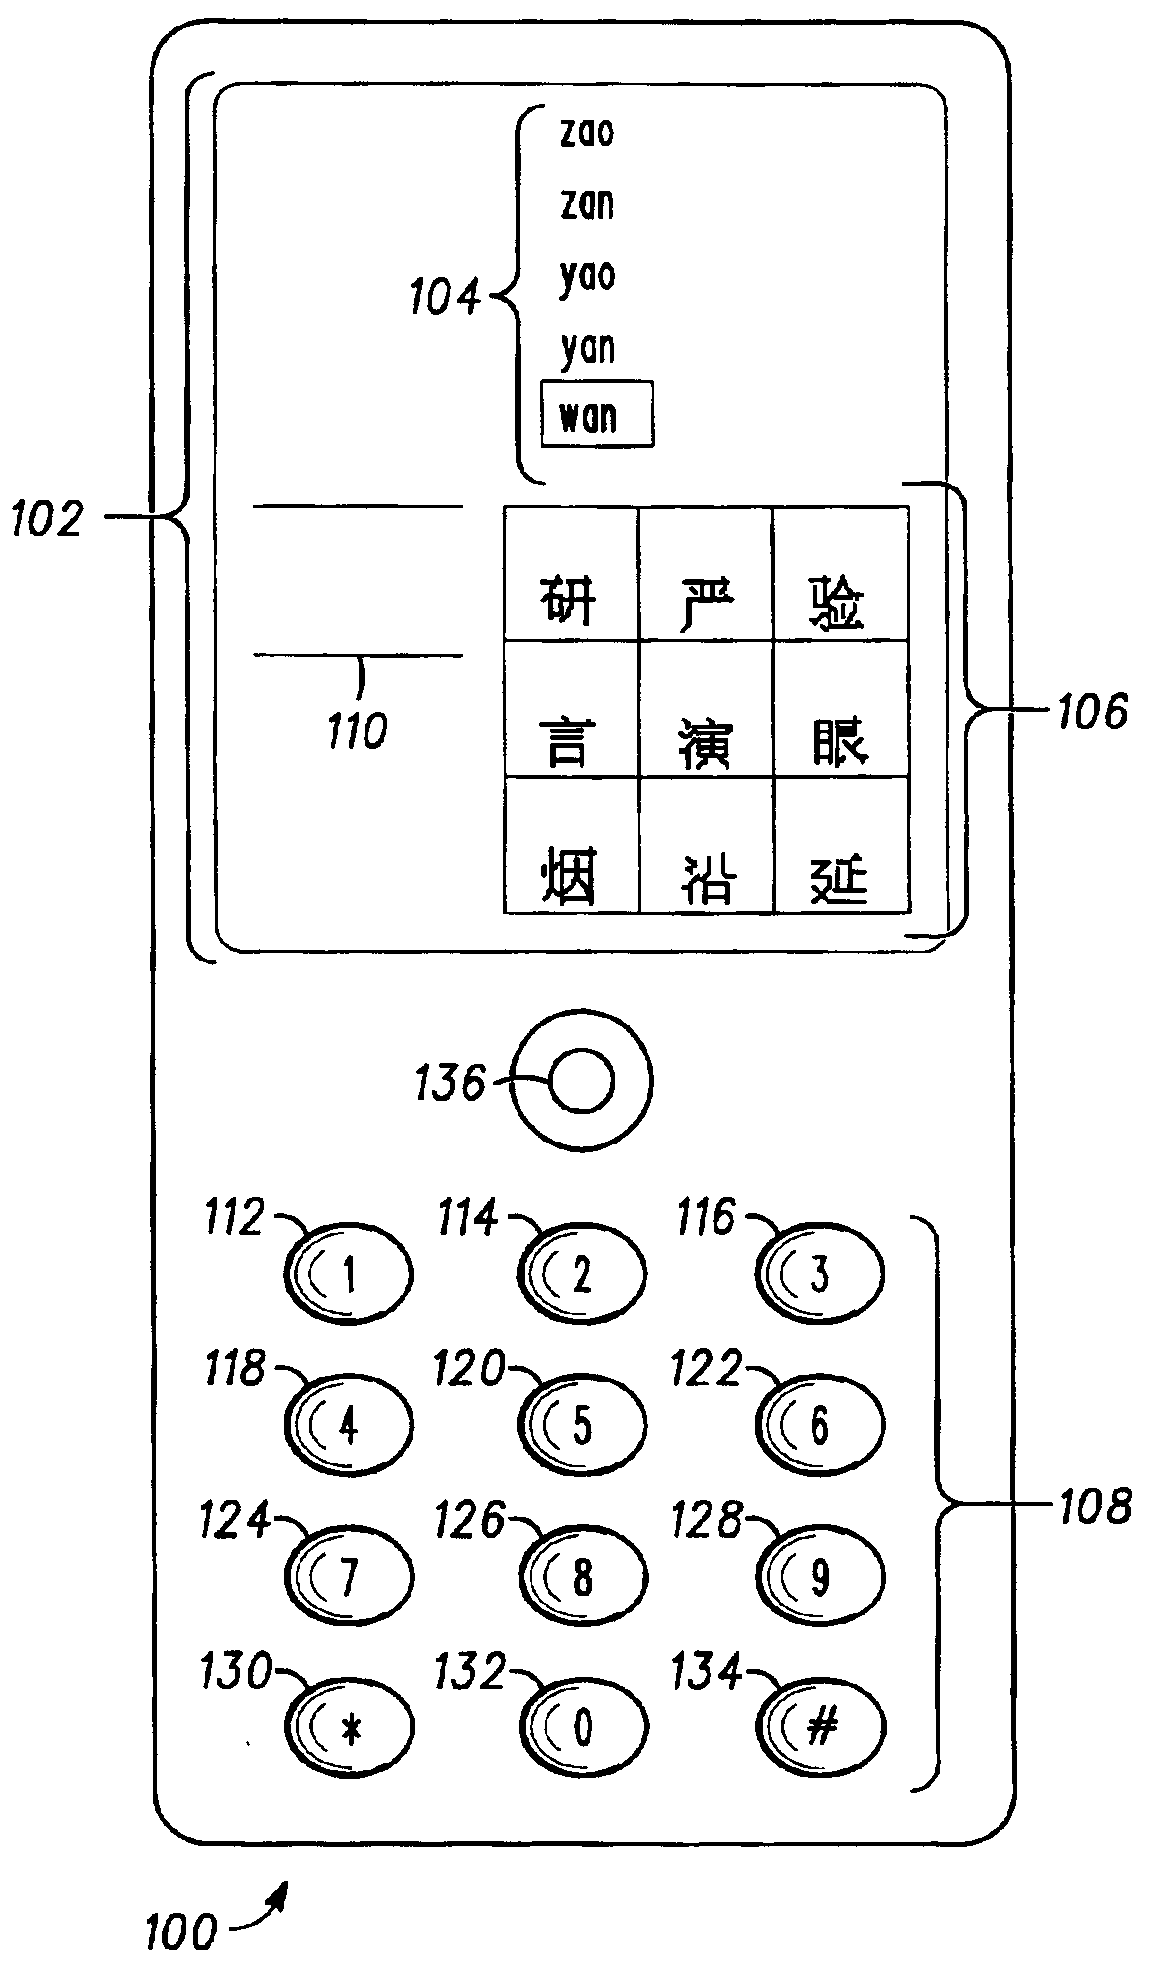 Method and apparatus for character entry in a wireless communication device